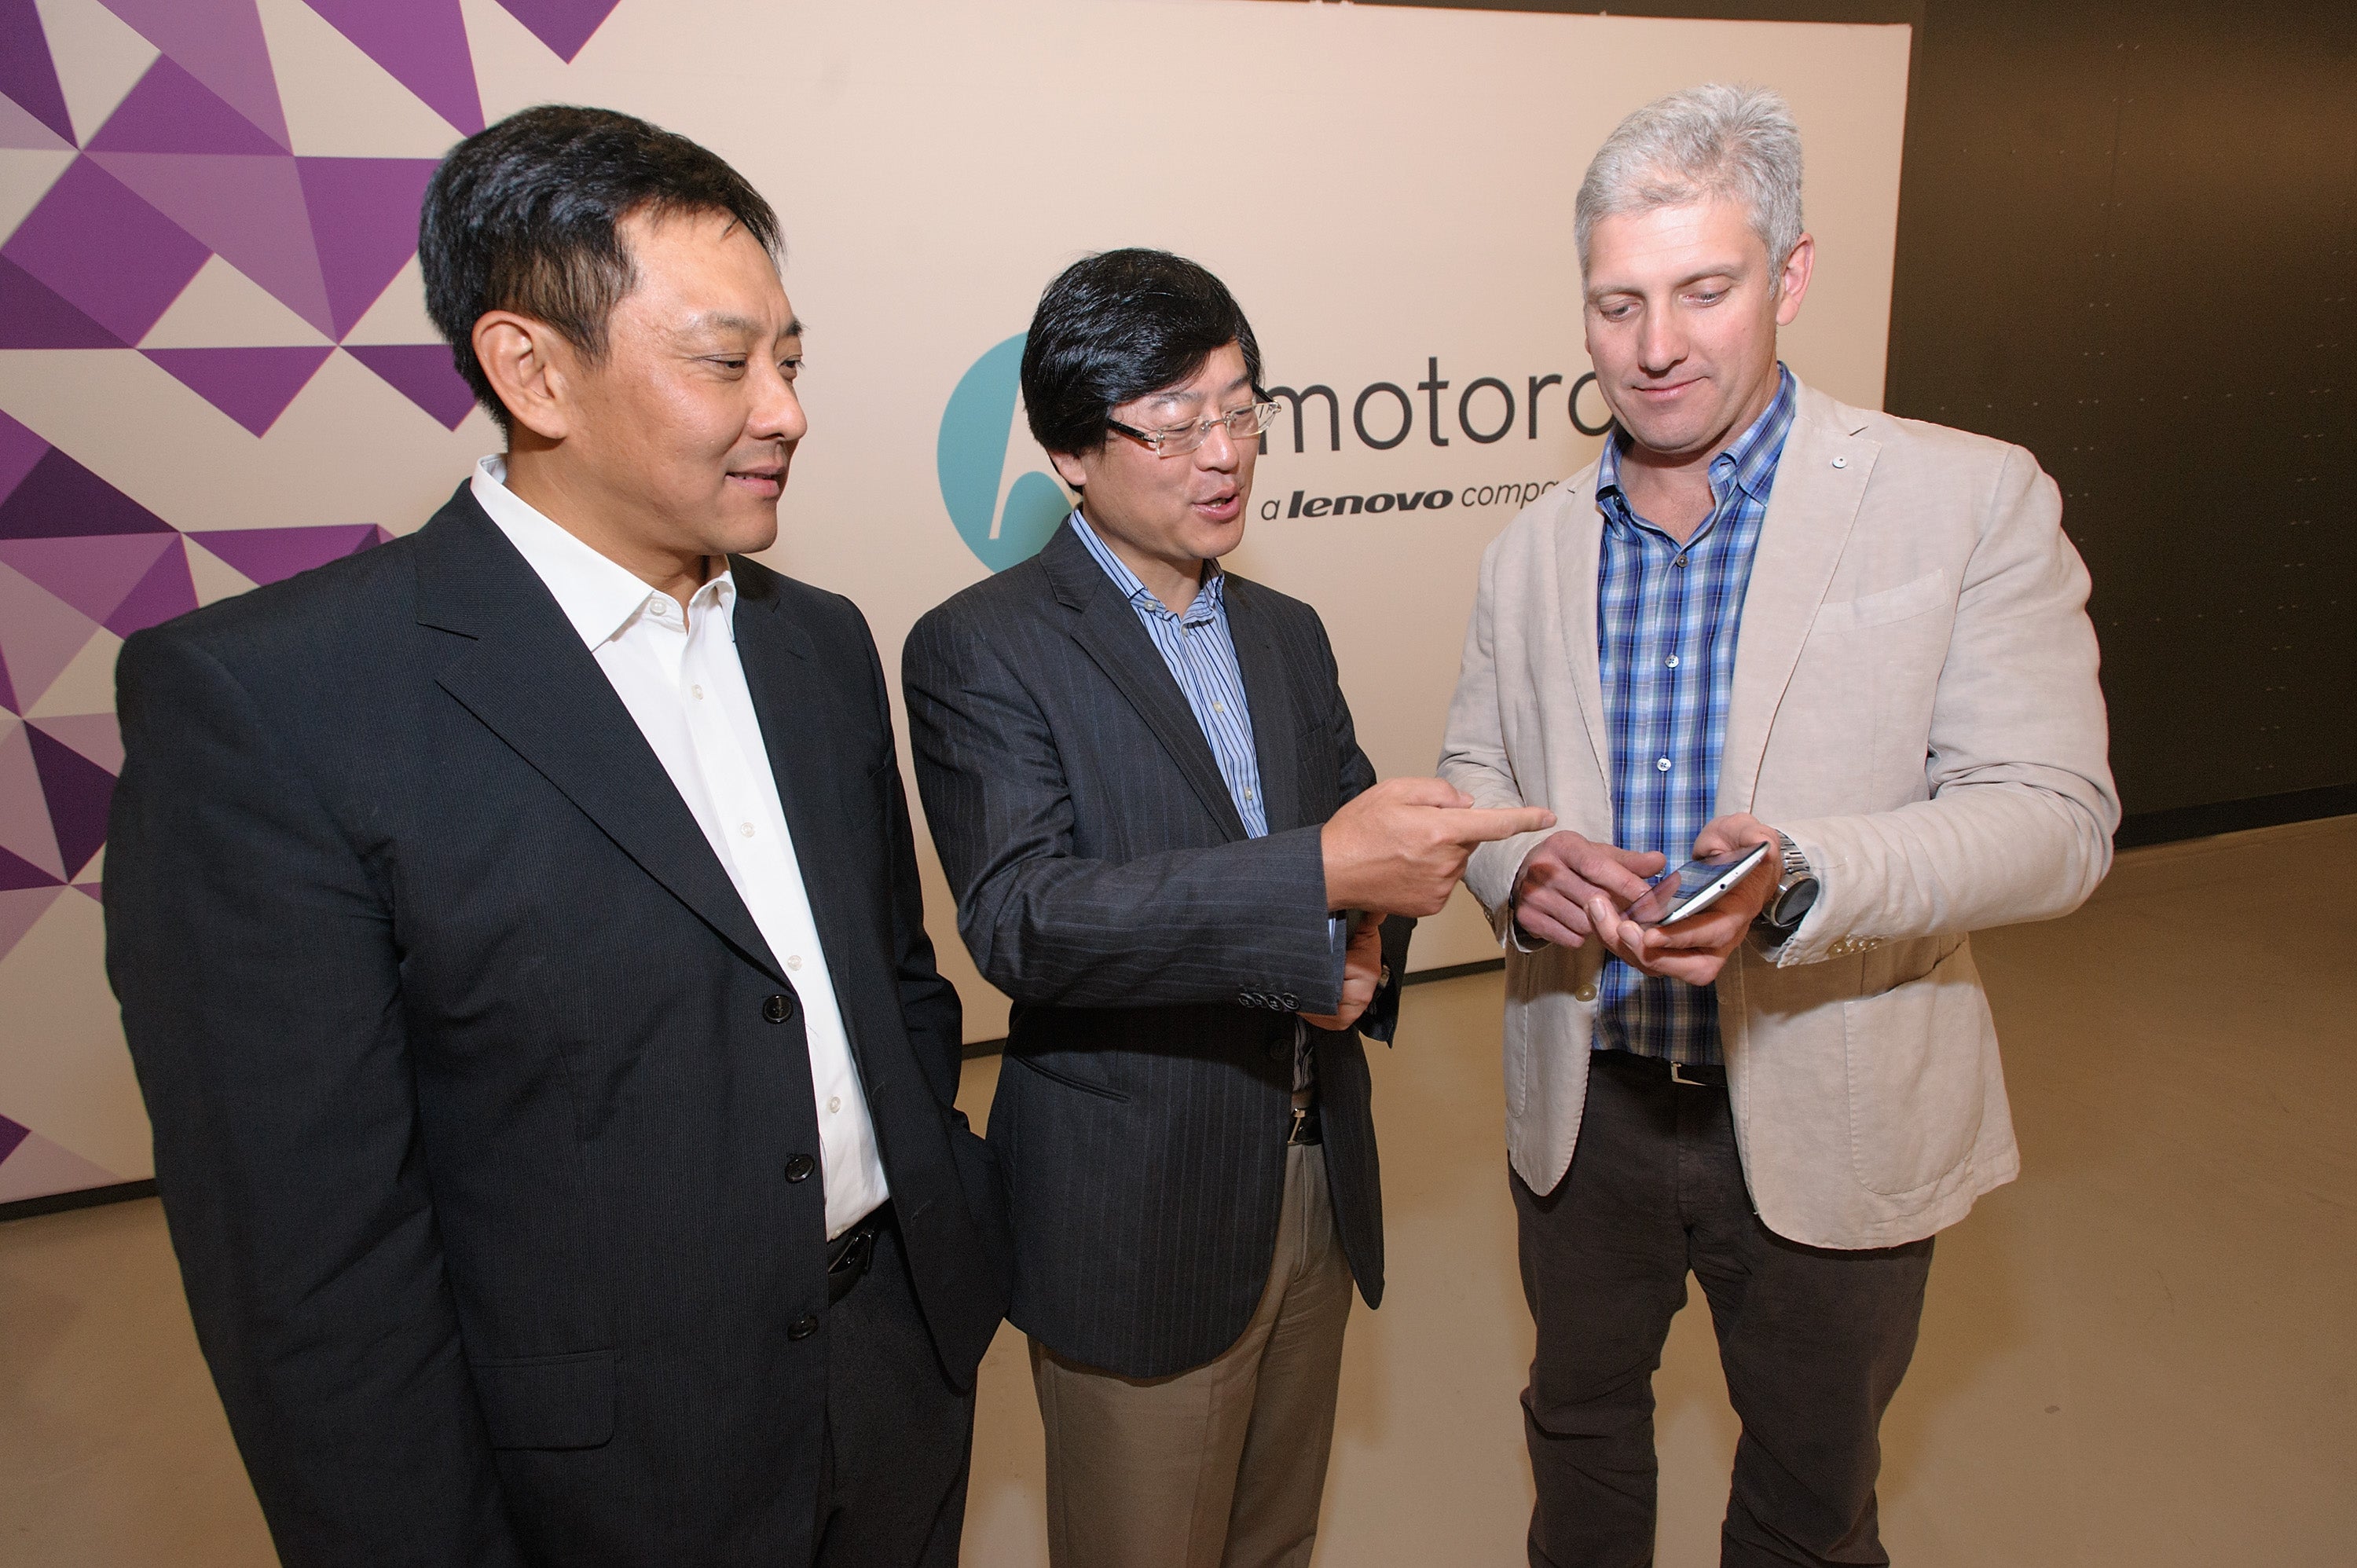 Liu Jun, president of Lenovo, Yang Yuanqing, Lenovo Chairman and CEO, and Rick Osterloh, President and COO of Motorola, announce the completion of the acquisition - It's official: Motorola and Lenovo finally tie the knot, the $2.9 billion deal with Google is complete at long last